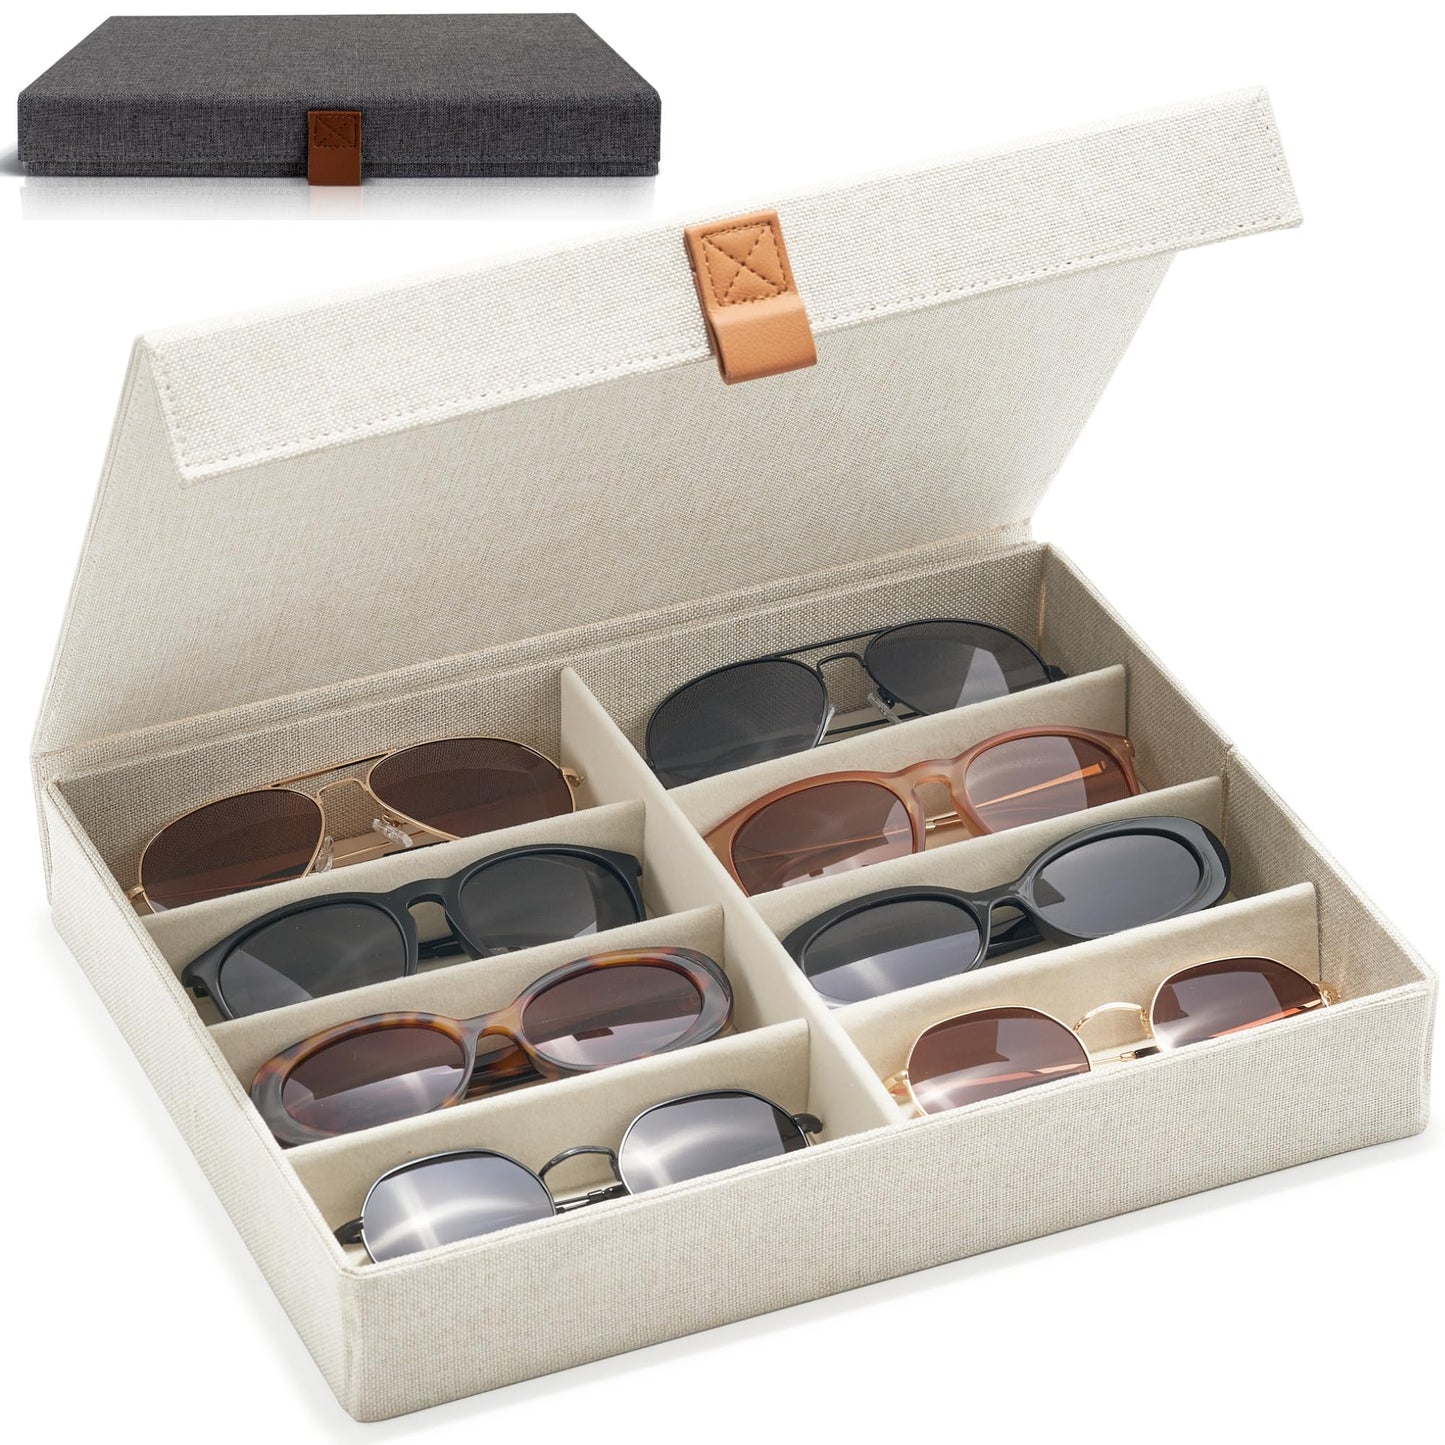 ZICOTO Beautiful Sunglass Storage Organizer For 8 Pairs - A Stylish Linen Case Protects and Displays All Your Glasses - The Perfect Storage Organizer To Hold Multiple Glasses Safe and Dust Free